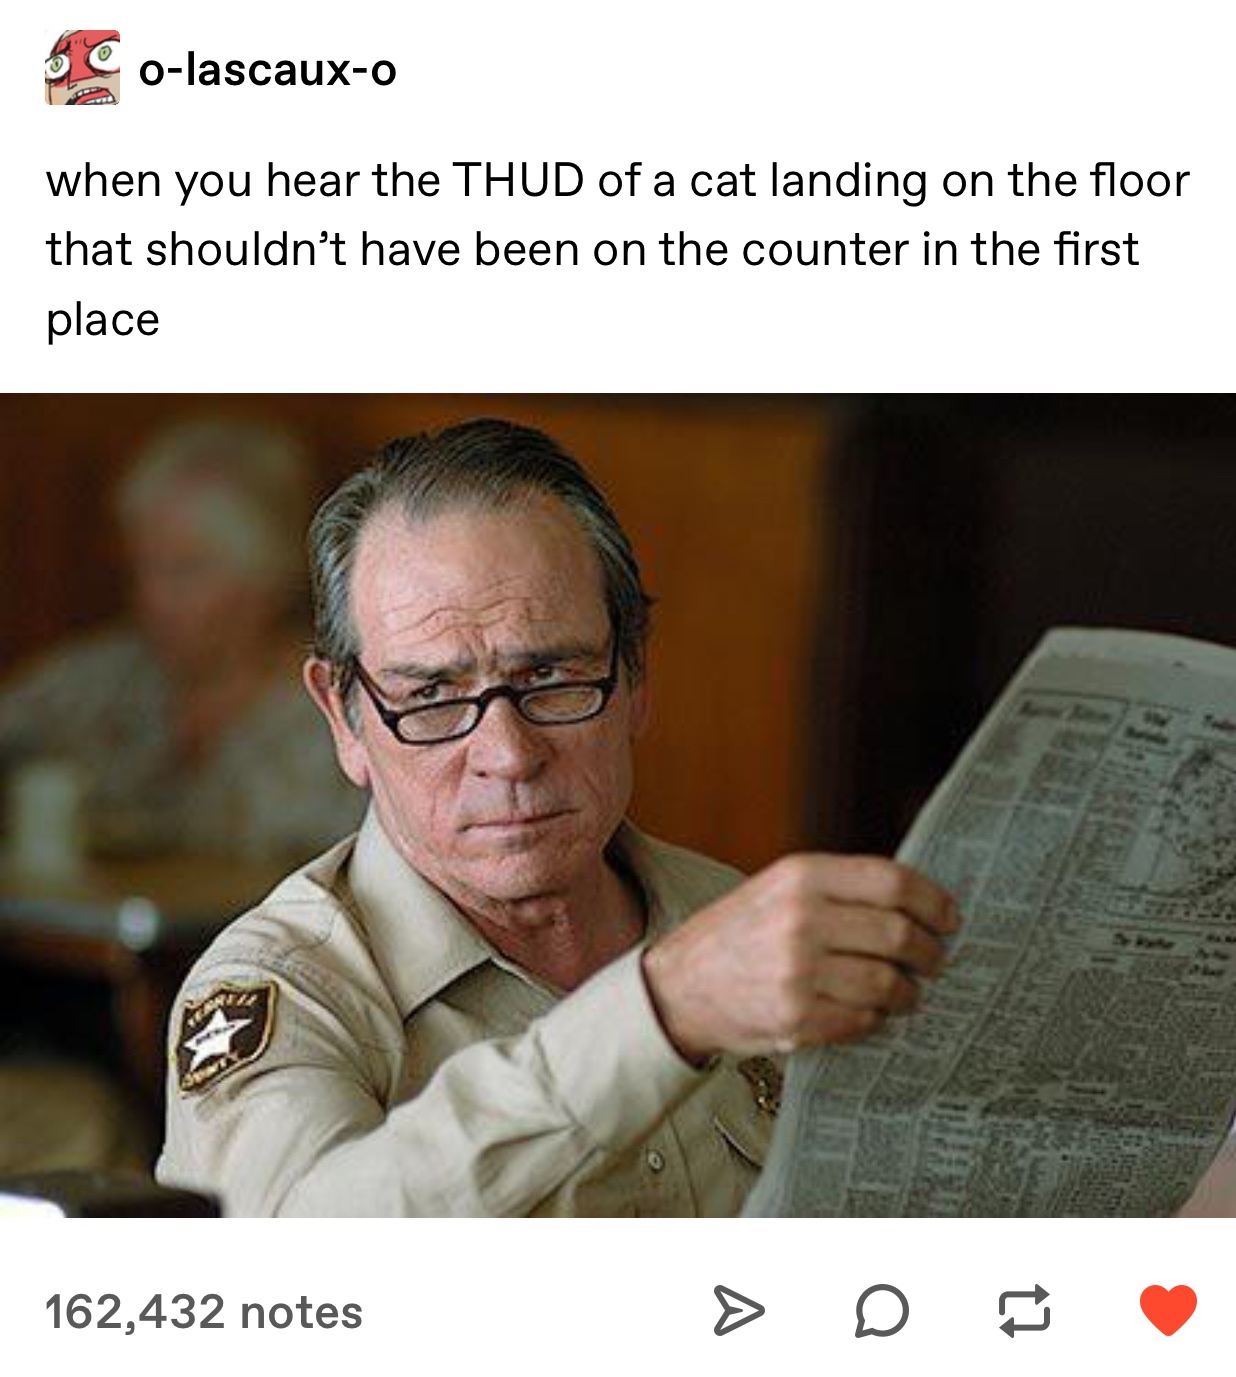 tommy lee jones no country - Colascauxo when you hear the Thud of a cat landing on the floor that shouldn't have been on the counter in the first place Stine 162,432 notes D